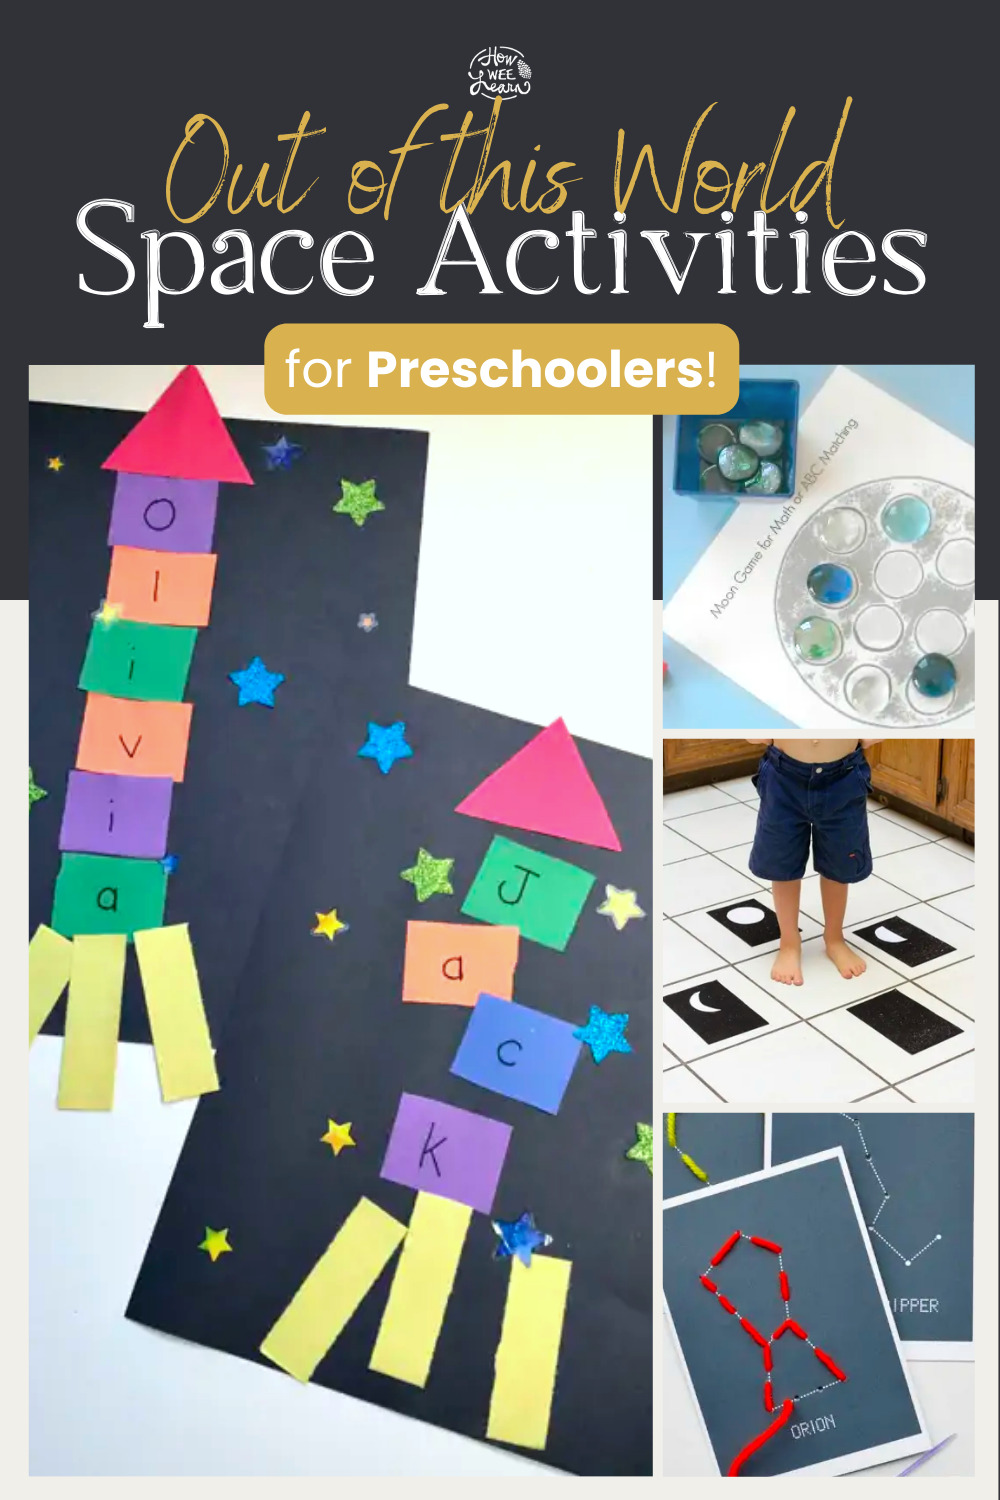 Out of this World Space Activities for Preschoolers!